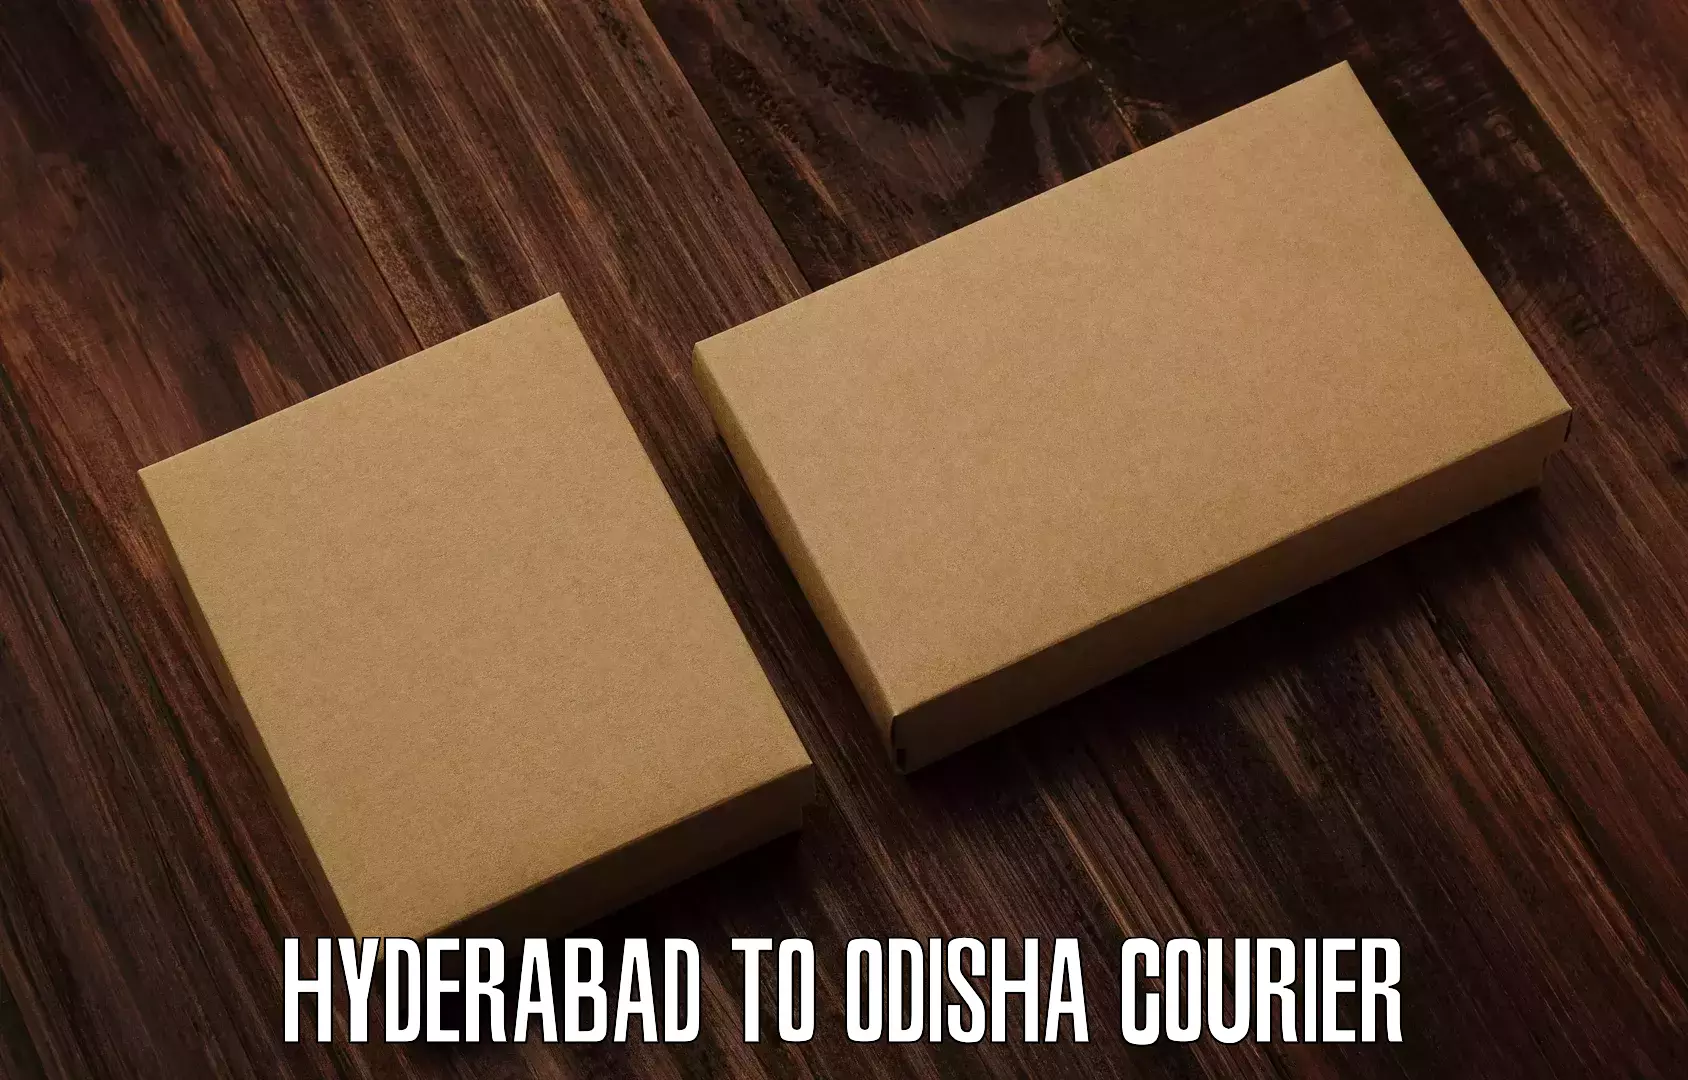 User-friendly delivery service Hyderabad to Sambalpur